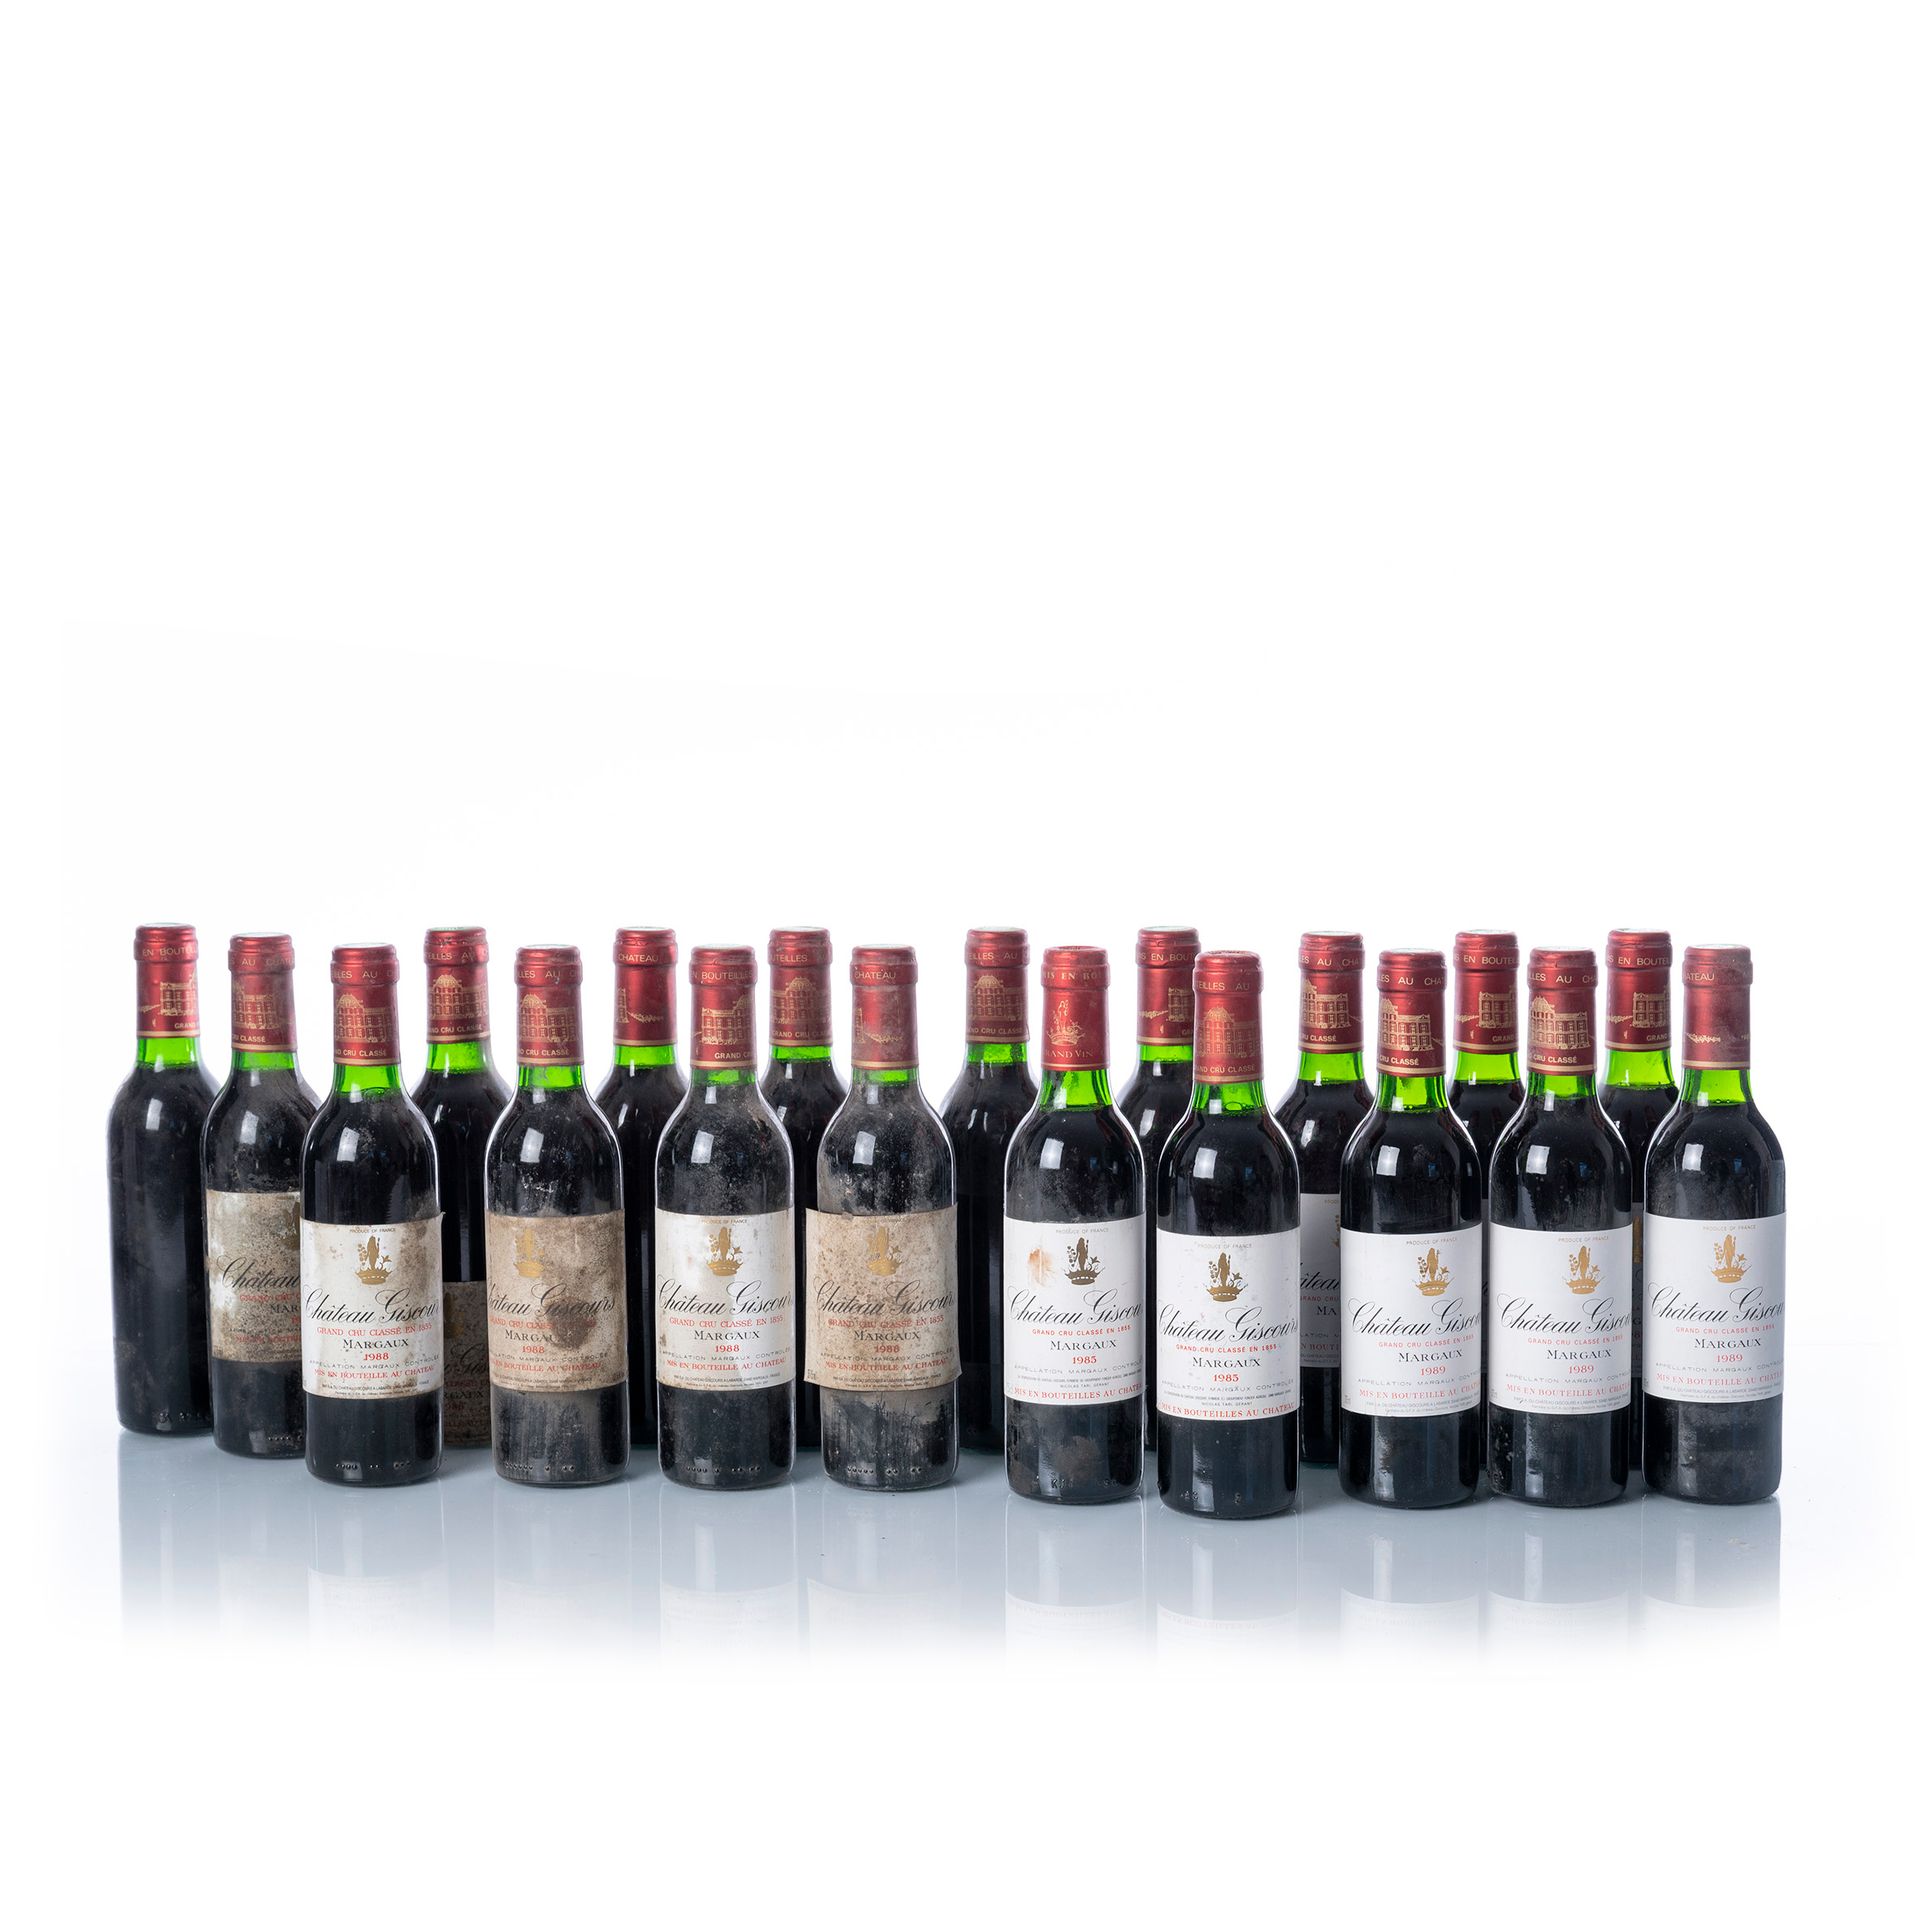 Null 19 half-bottles (37,5 cl.) CHÂTEAU GISCOURS

Year : 2 Db of 1985 ; 11 Db of&hellip;